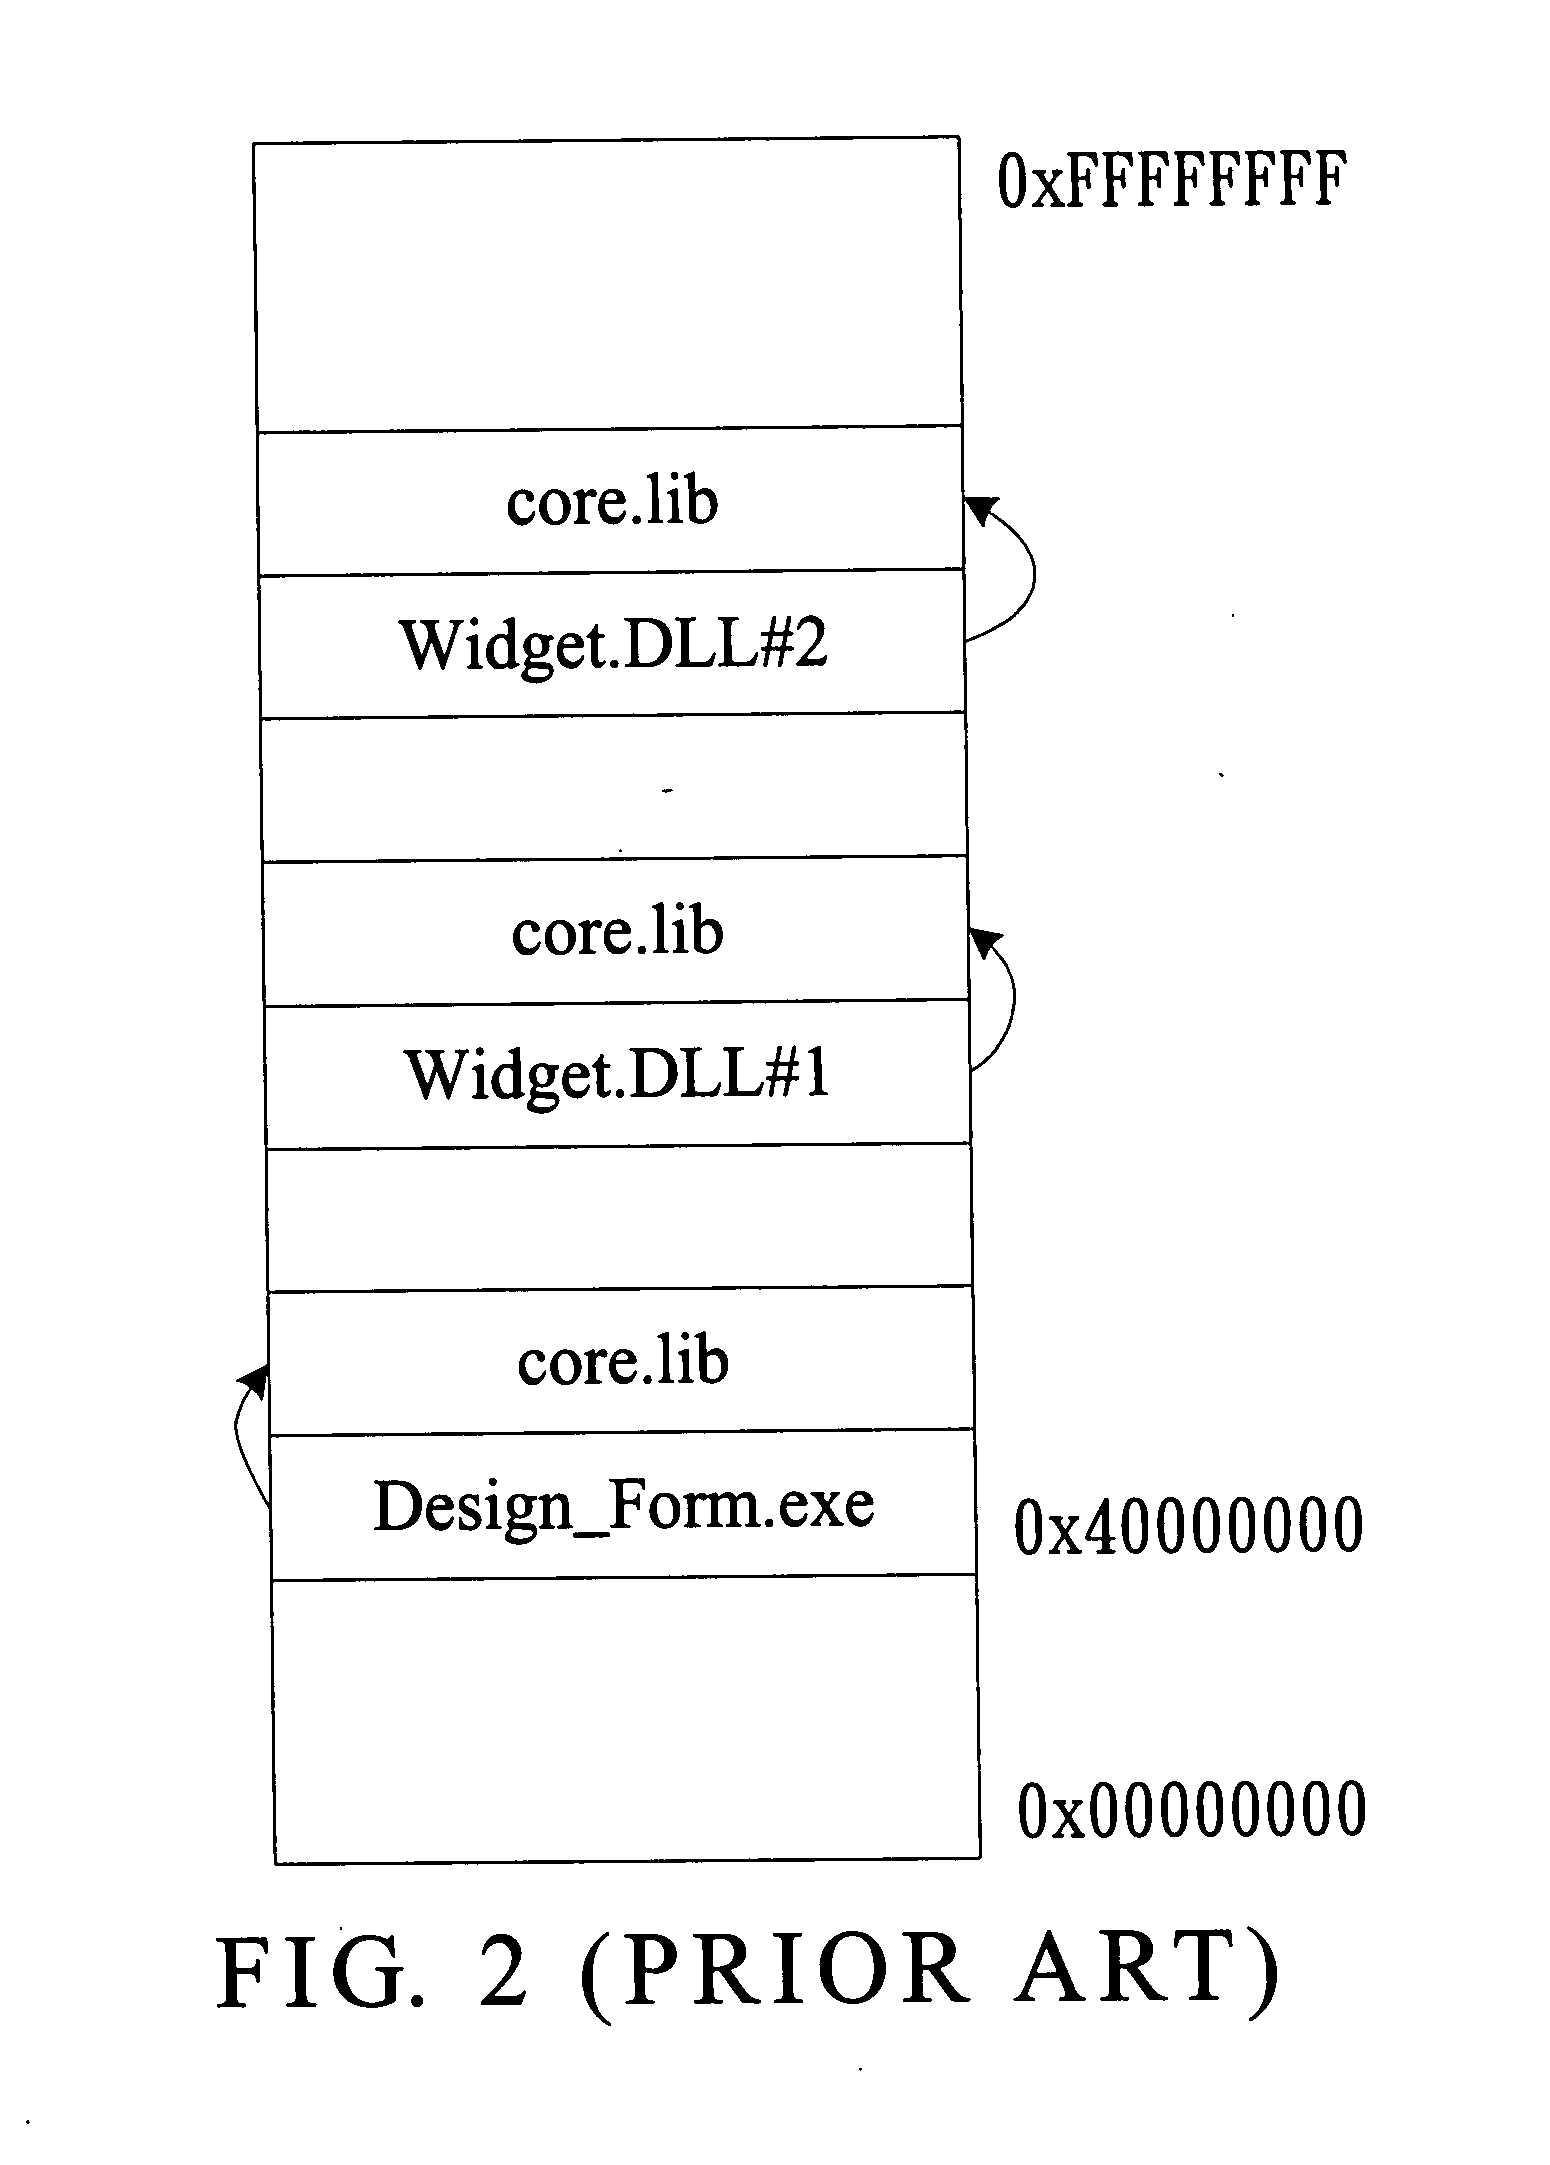 Method for sharing static link code by software components in DLL and main program